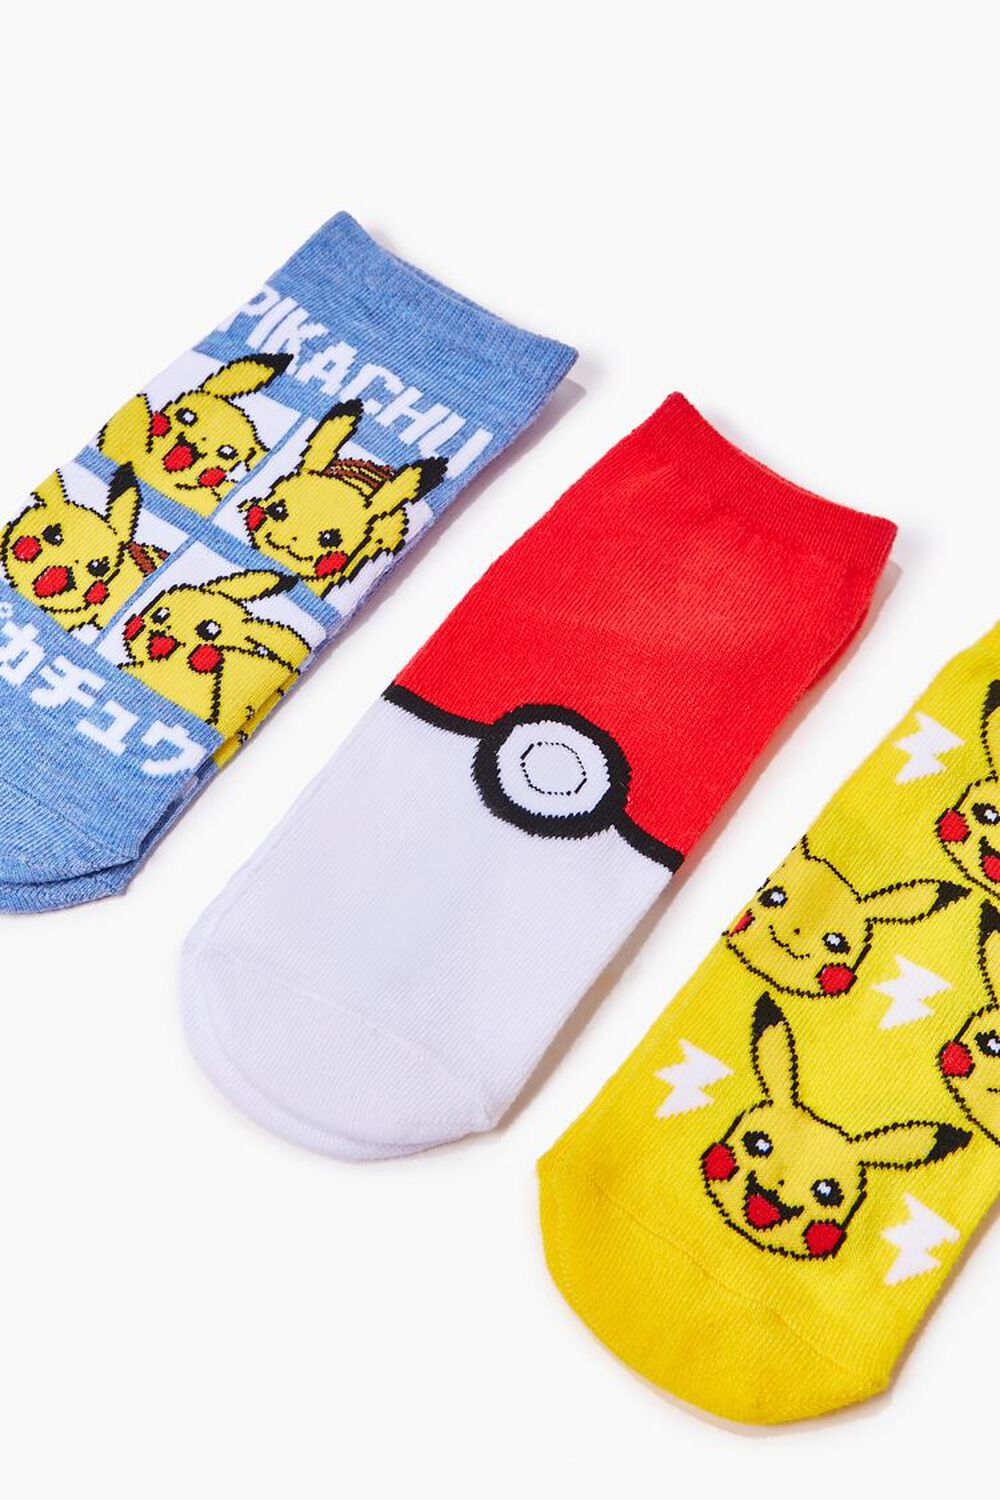 Pikachu Graphic Ankle Socks - 3 pack, image 2